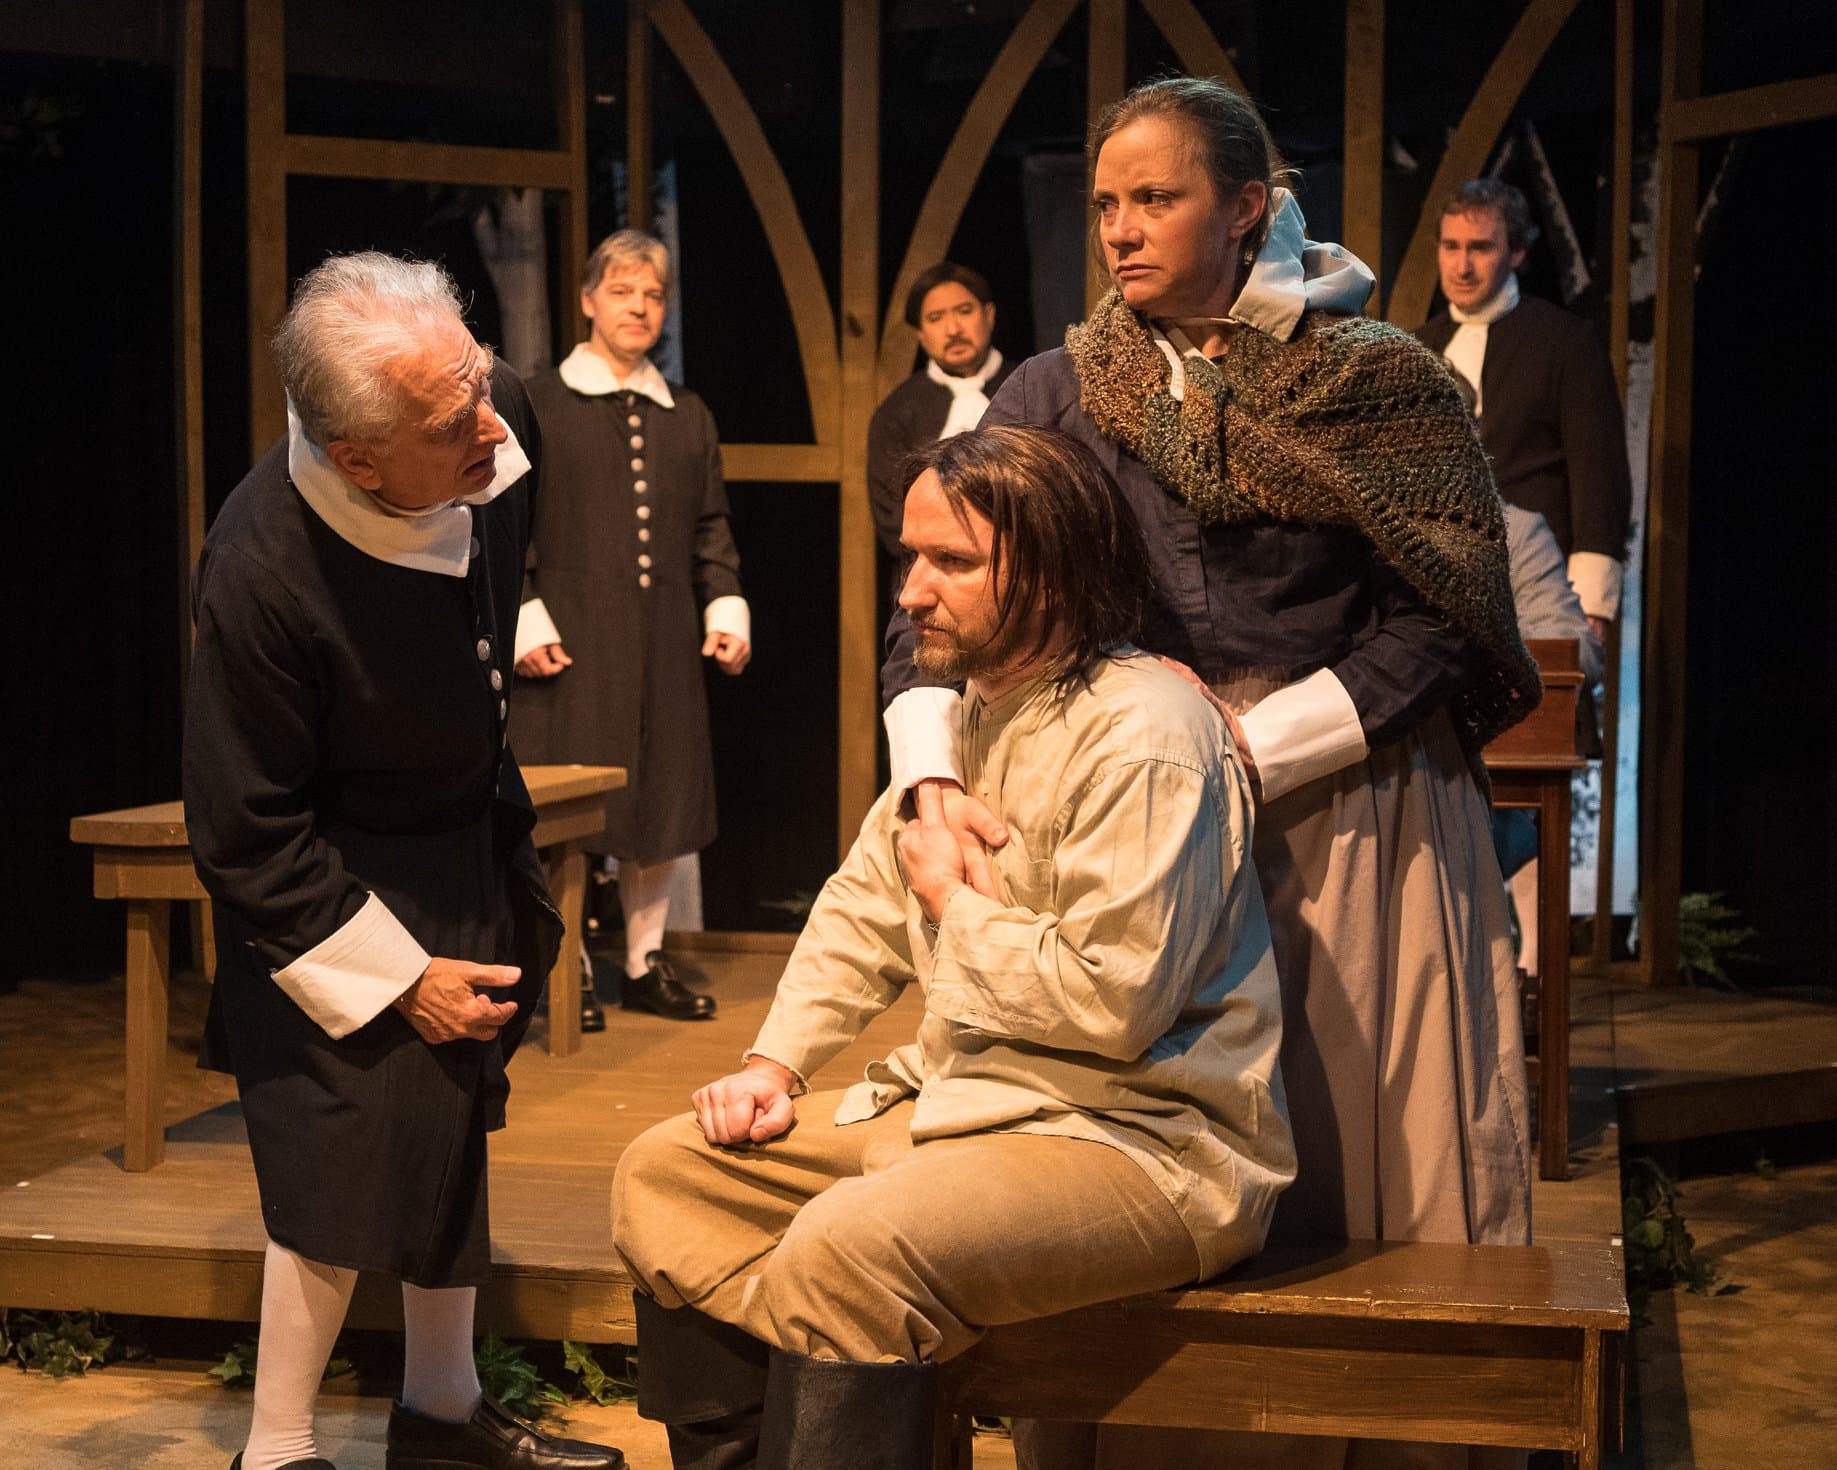 The cast of The Crucible, now playing at Silver Spring Stage. Photo by Harvey Levine.